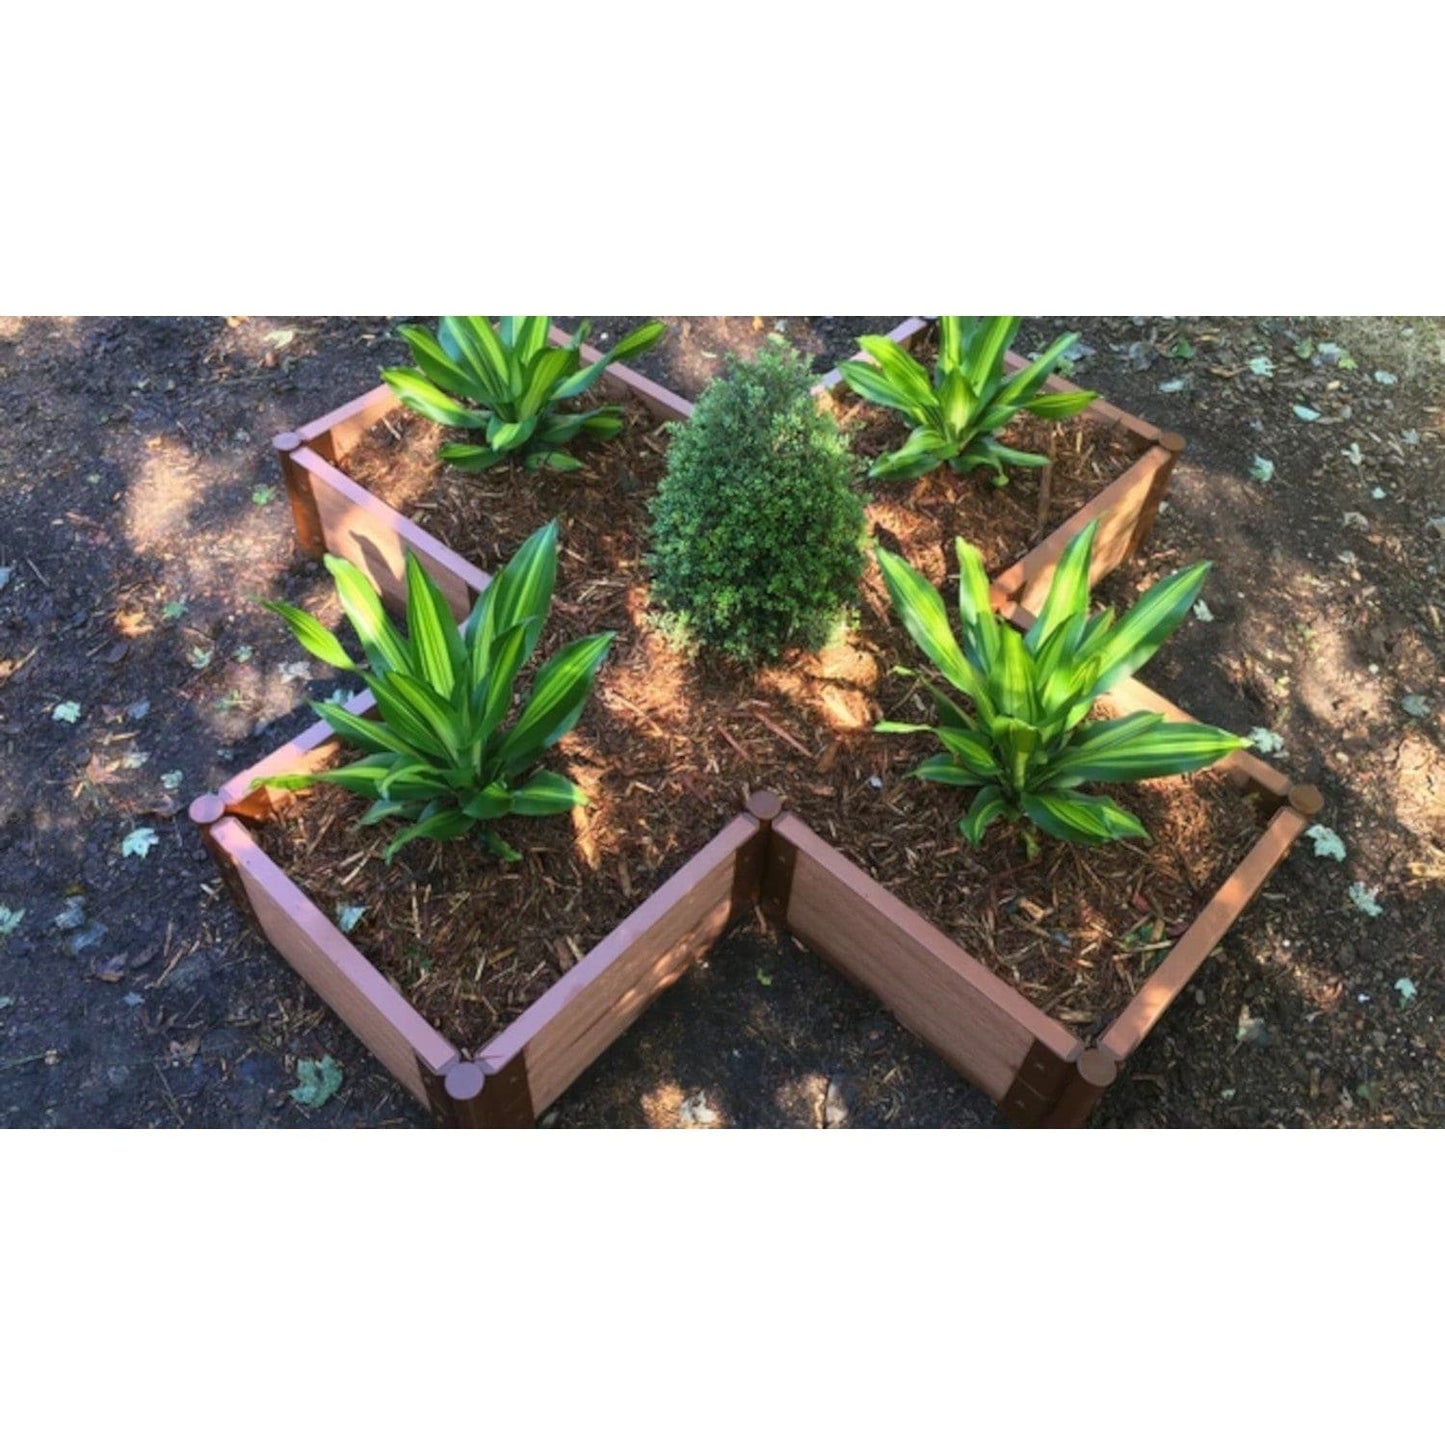 Frame It All Gardening Accessories Frame It All | Tool-Free Military Medallion Raised Garden Bed (Kit Cross) 6' X 6' X 16.5" - Weathered Wood - 1" Profile 200003485